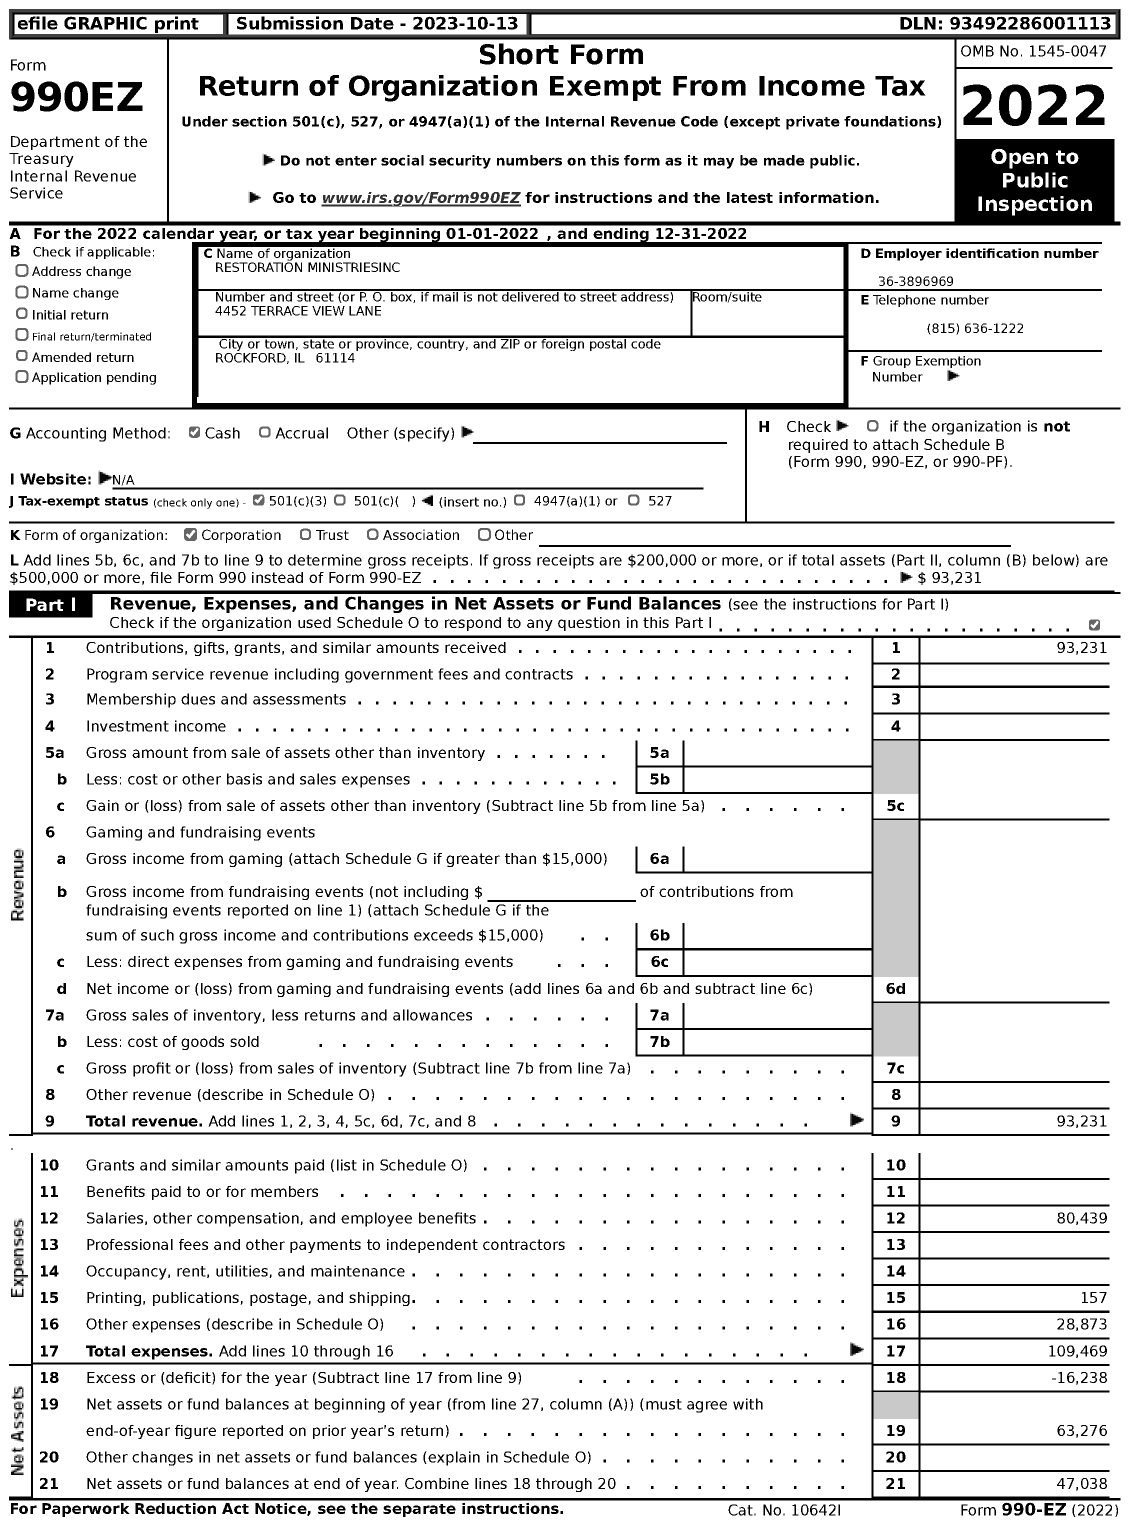 Image of first page of 2022 Form 990EZ for Restoration Ministriesinc